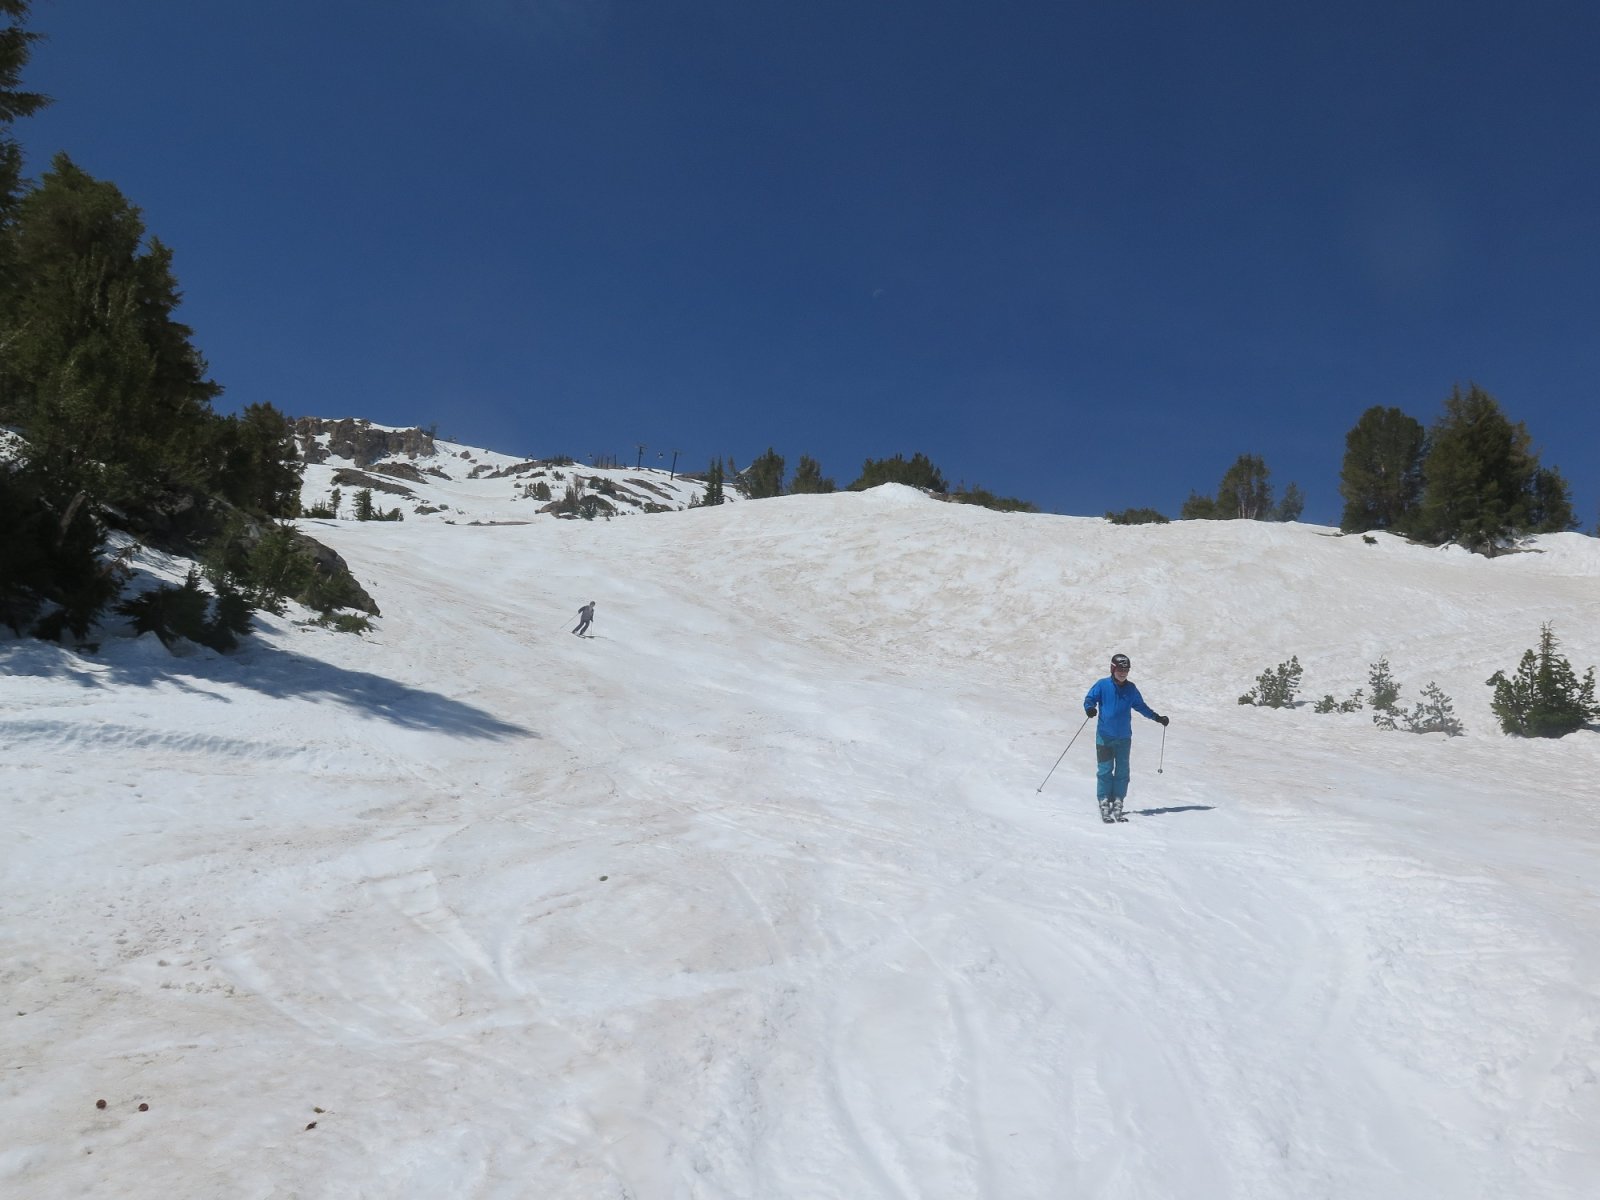 Mammoth, May 23-24, 2022 | Liftlines Skiing and Snowboarding Forums